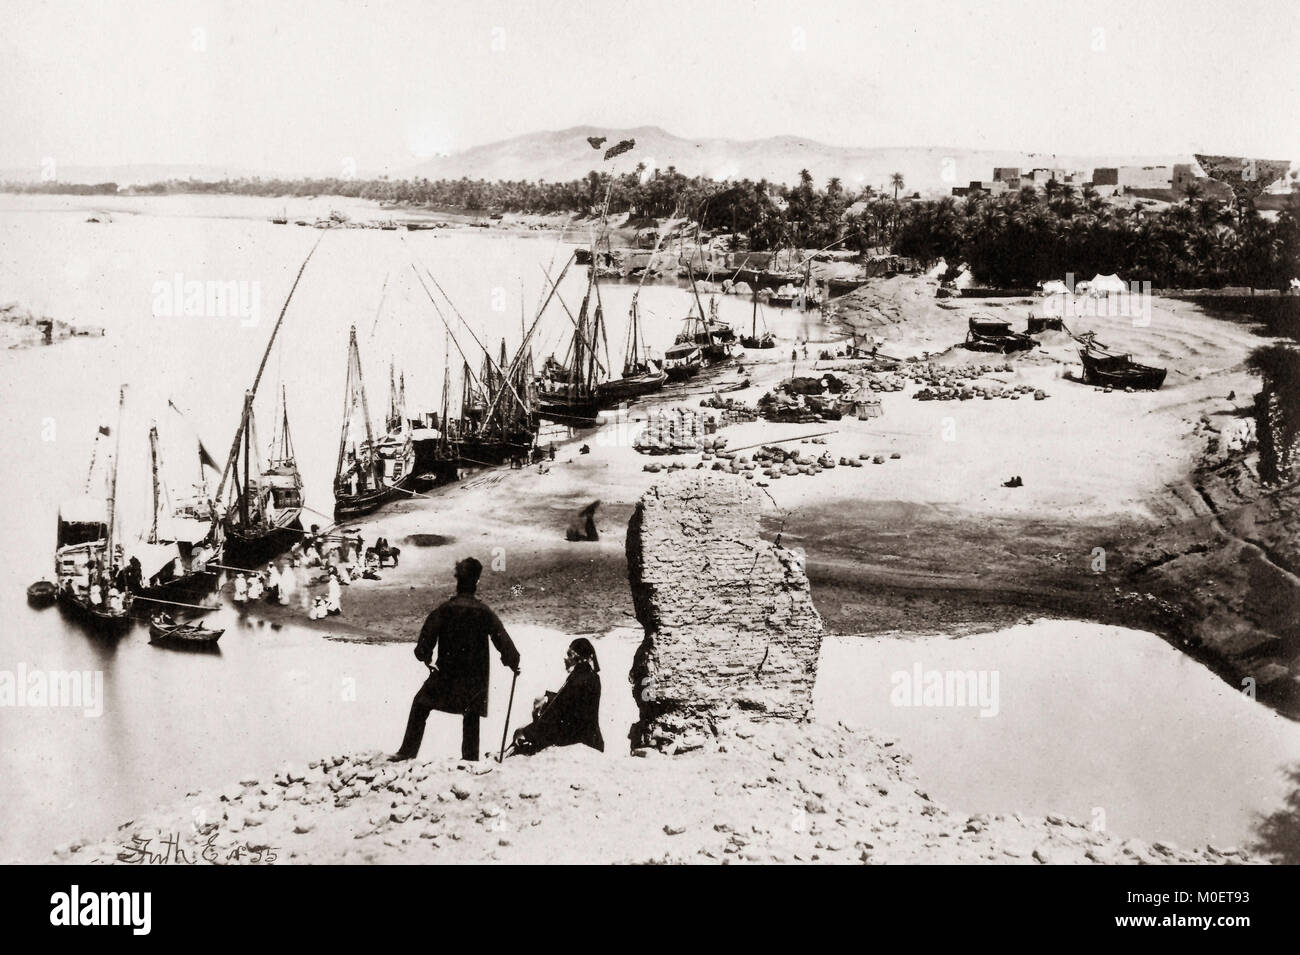 Boats on the Nile at Assouan (Aswan), Egypt 1857. It seems probable that the figure mid-frame is Frith himself. Stock Photo